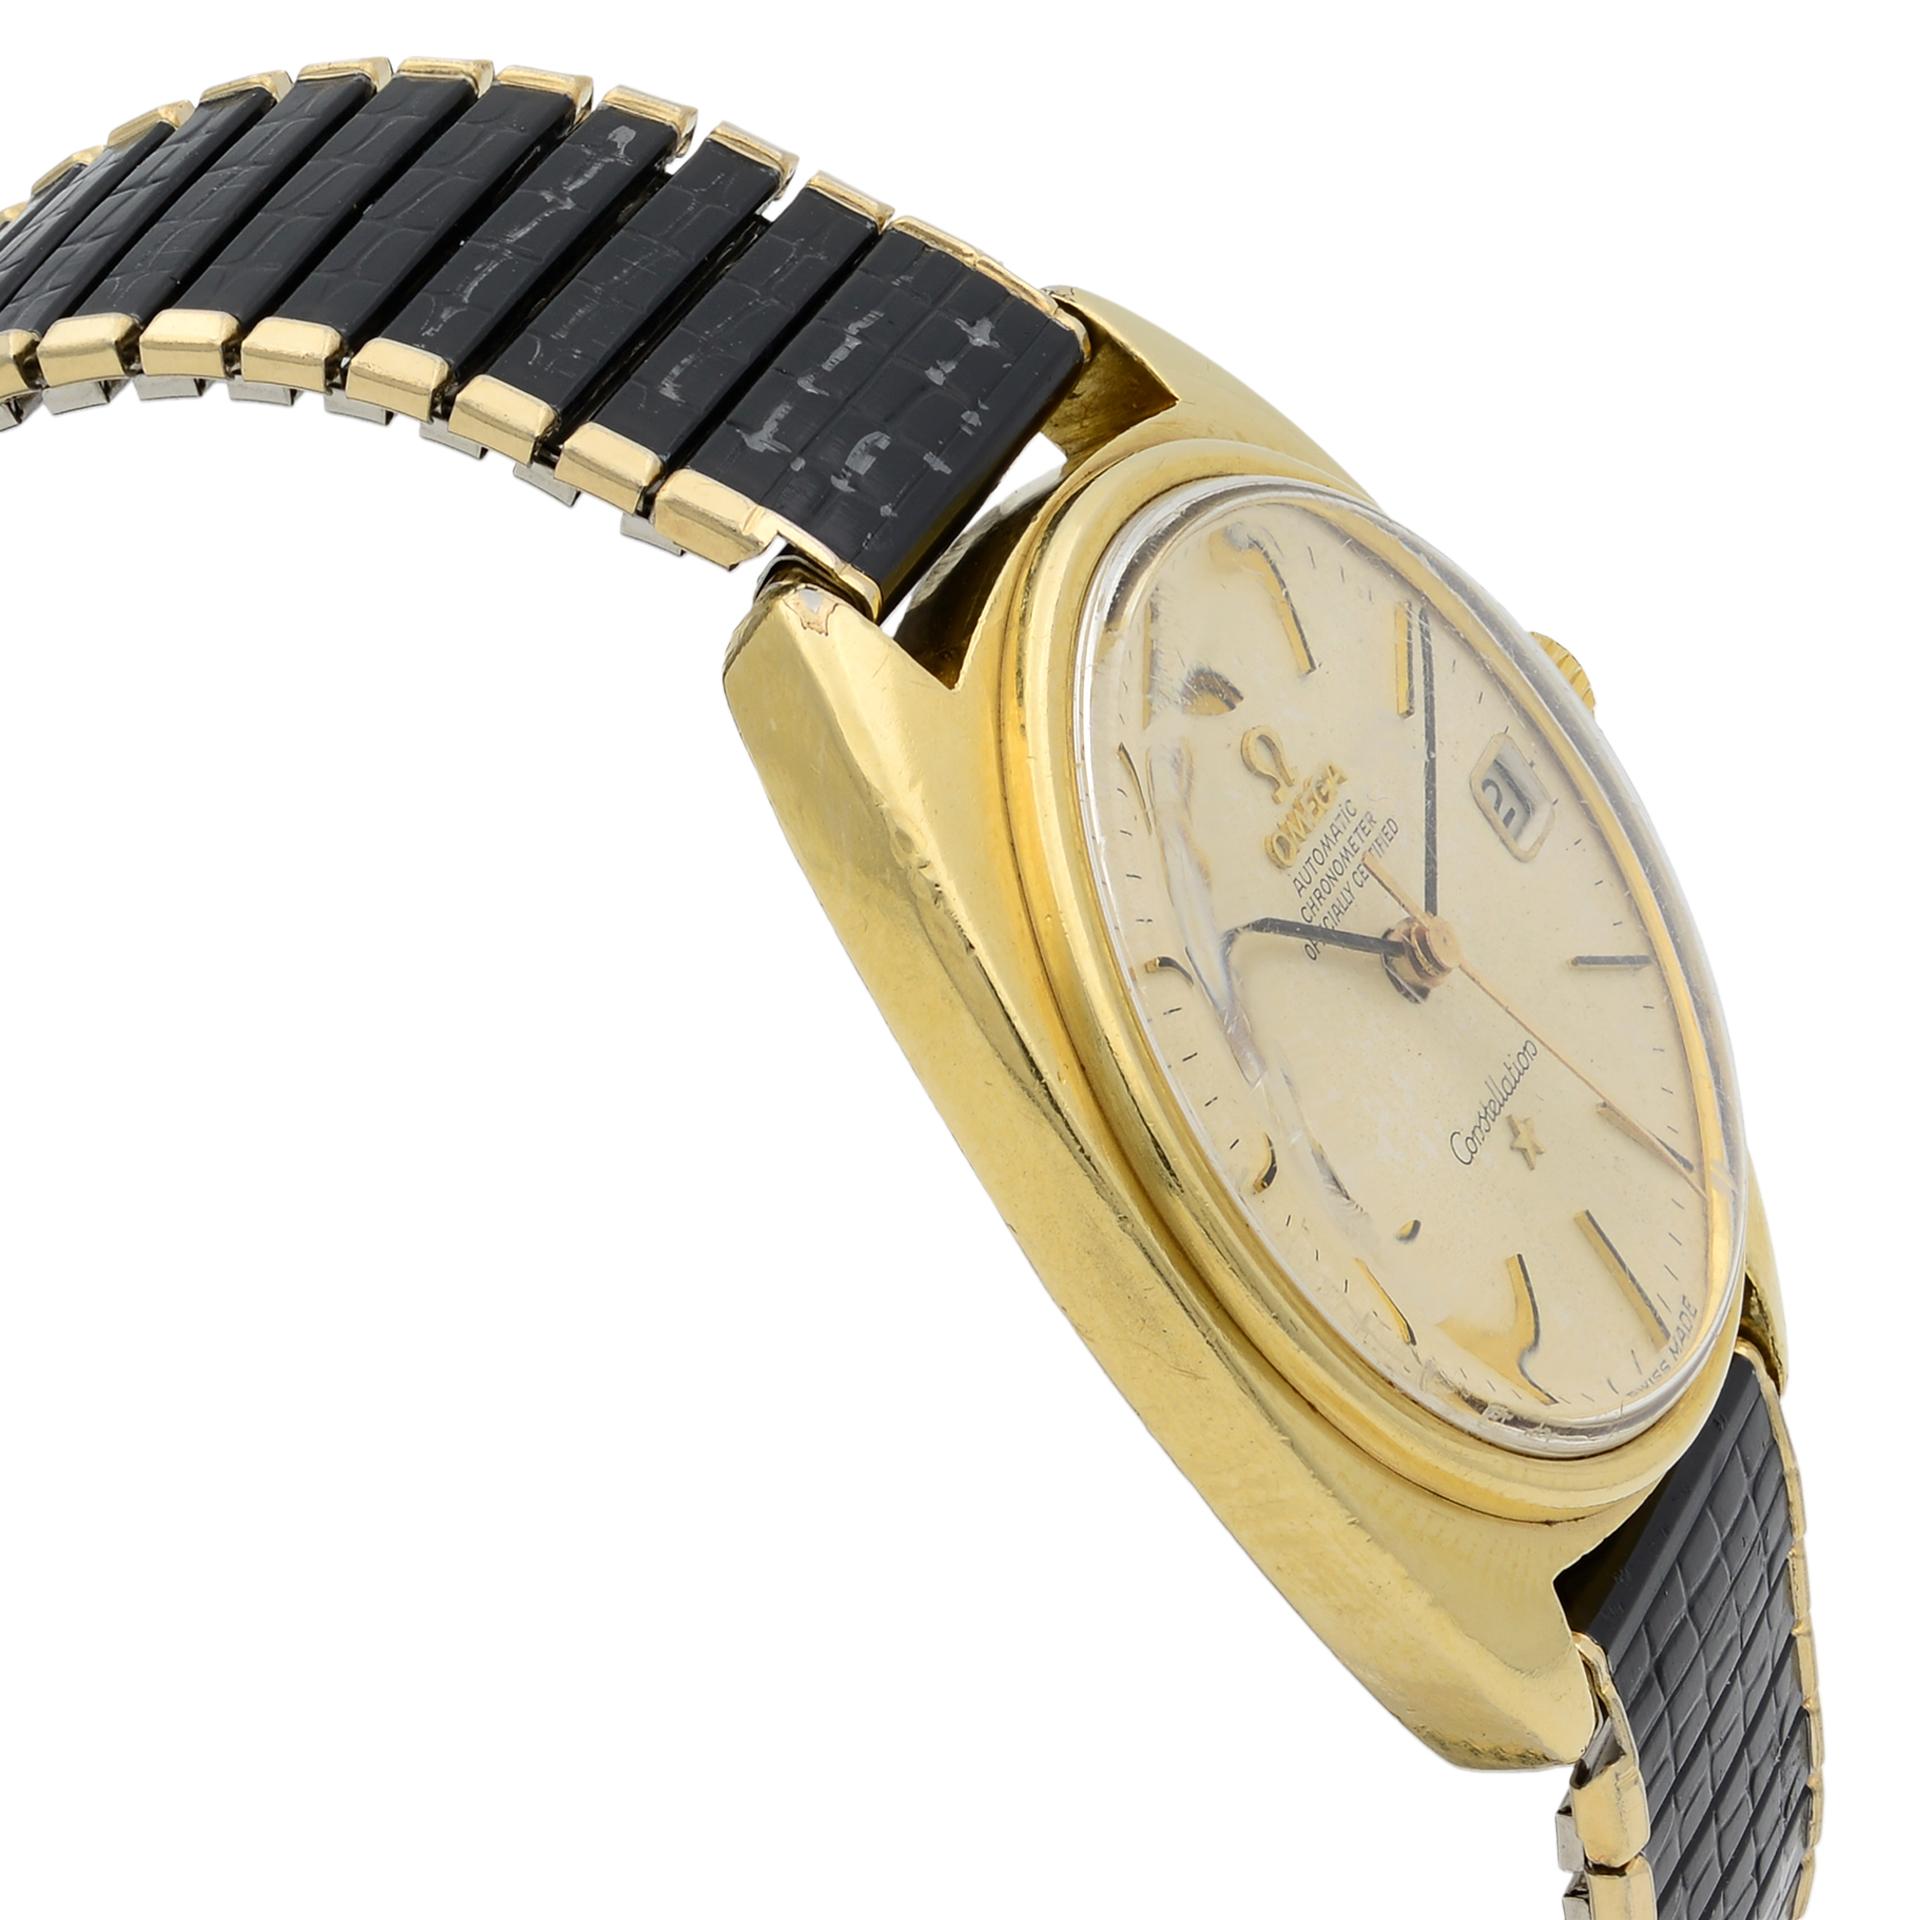 omega constellation gold face